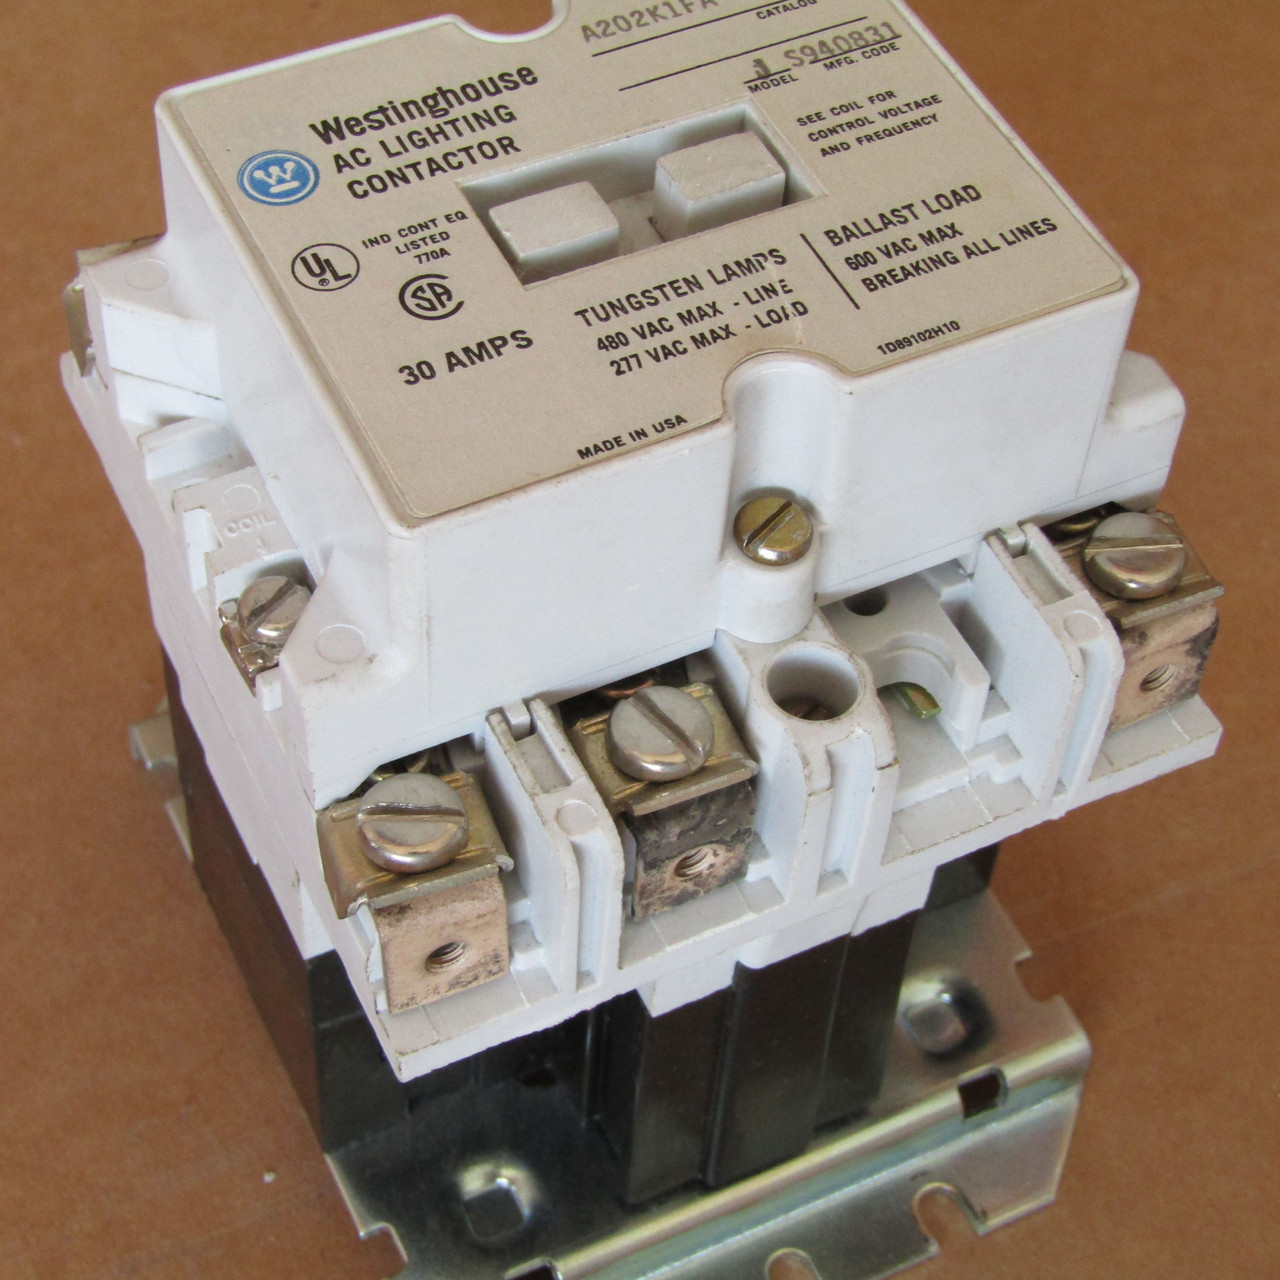 Westinghouse A202K1FA Lighting Contactor 30 Amp 3P 480VAC 120V Coil Model J - Used